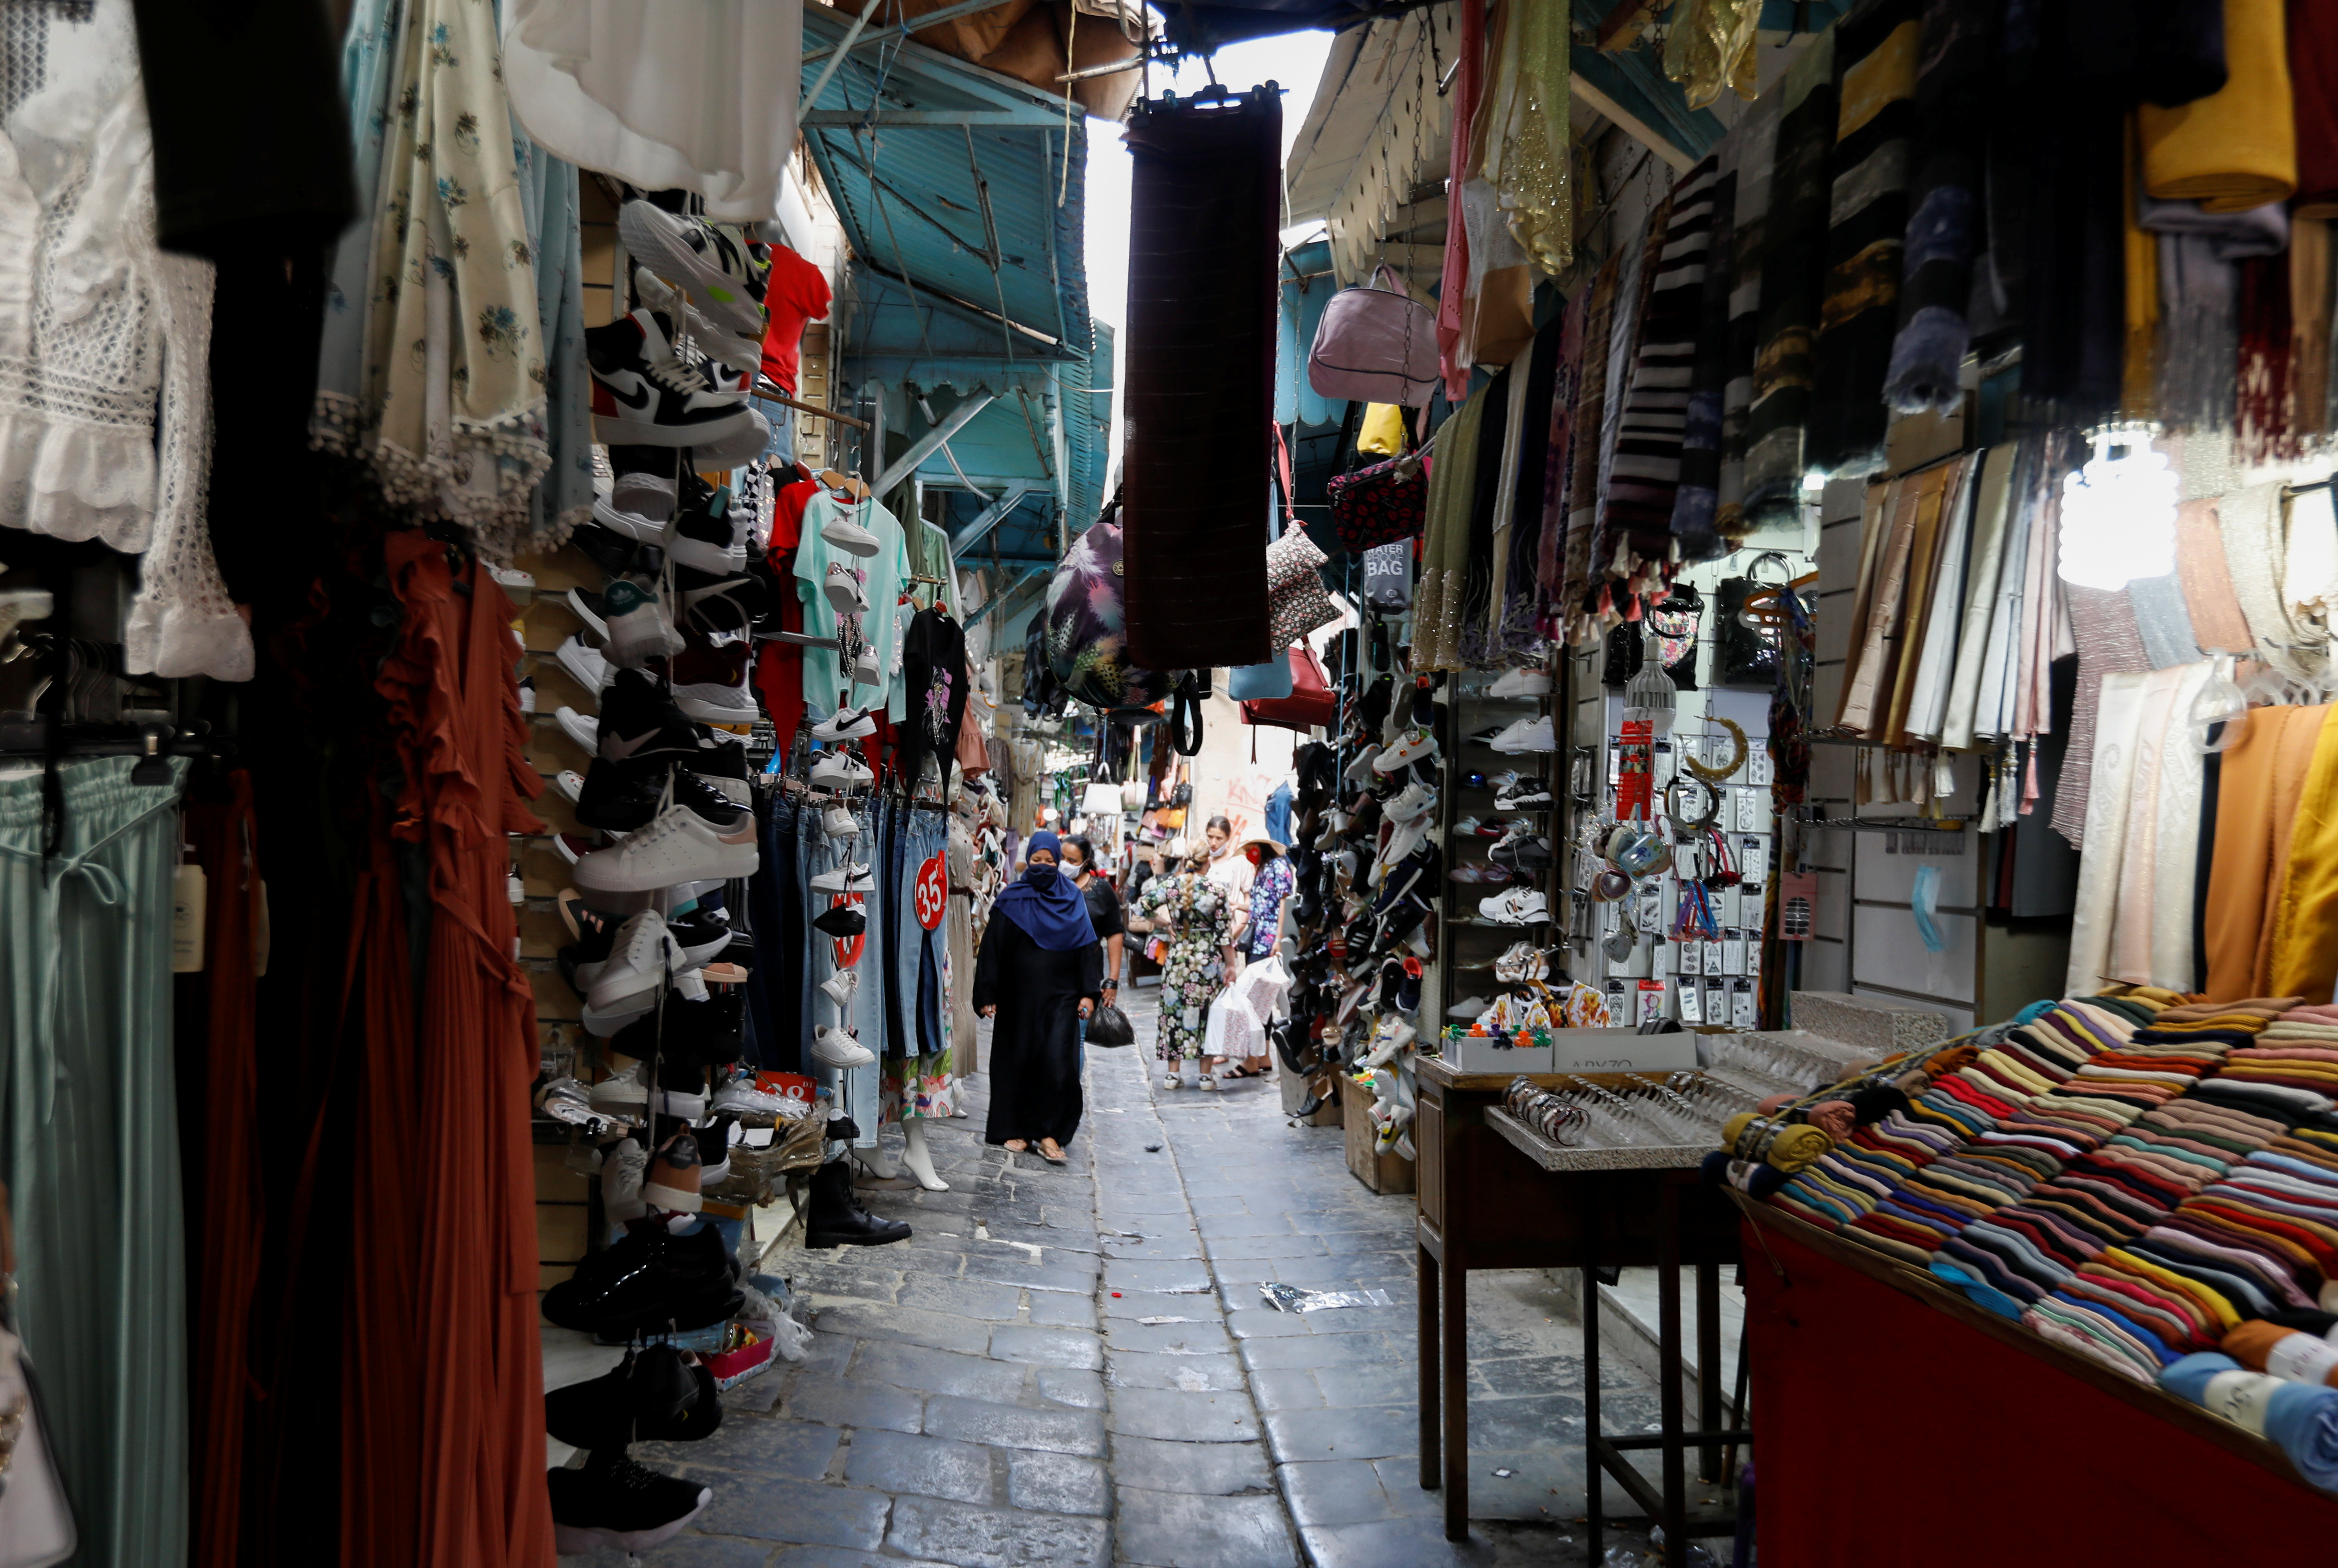 People walk past shops in the Medina, in the old city of Tunis